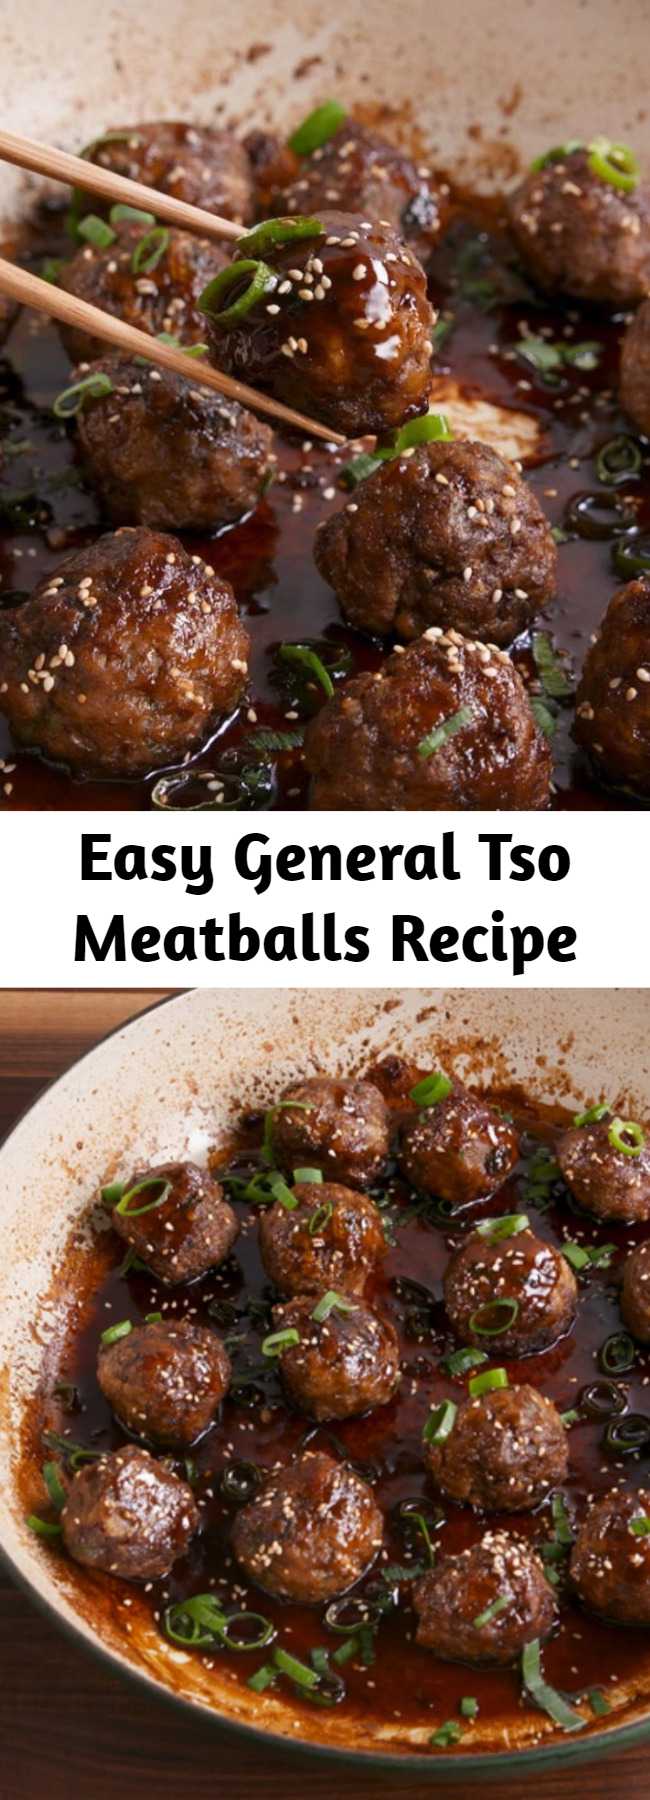 Easy General Tso Meatballs Recipe - Skip the takeout and create your own version as a meatball. #recipe #easyrecipe #easy #easydinner #dinner #dinnerrecipes #meatballs #beef #groundbeef #chinese #chinesefood